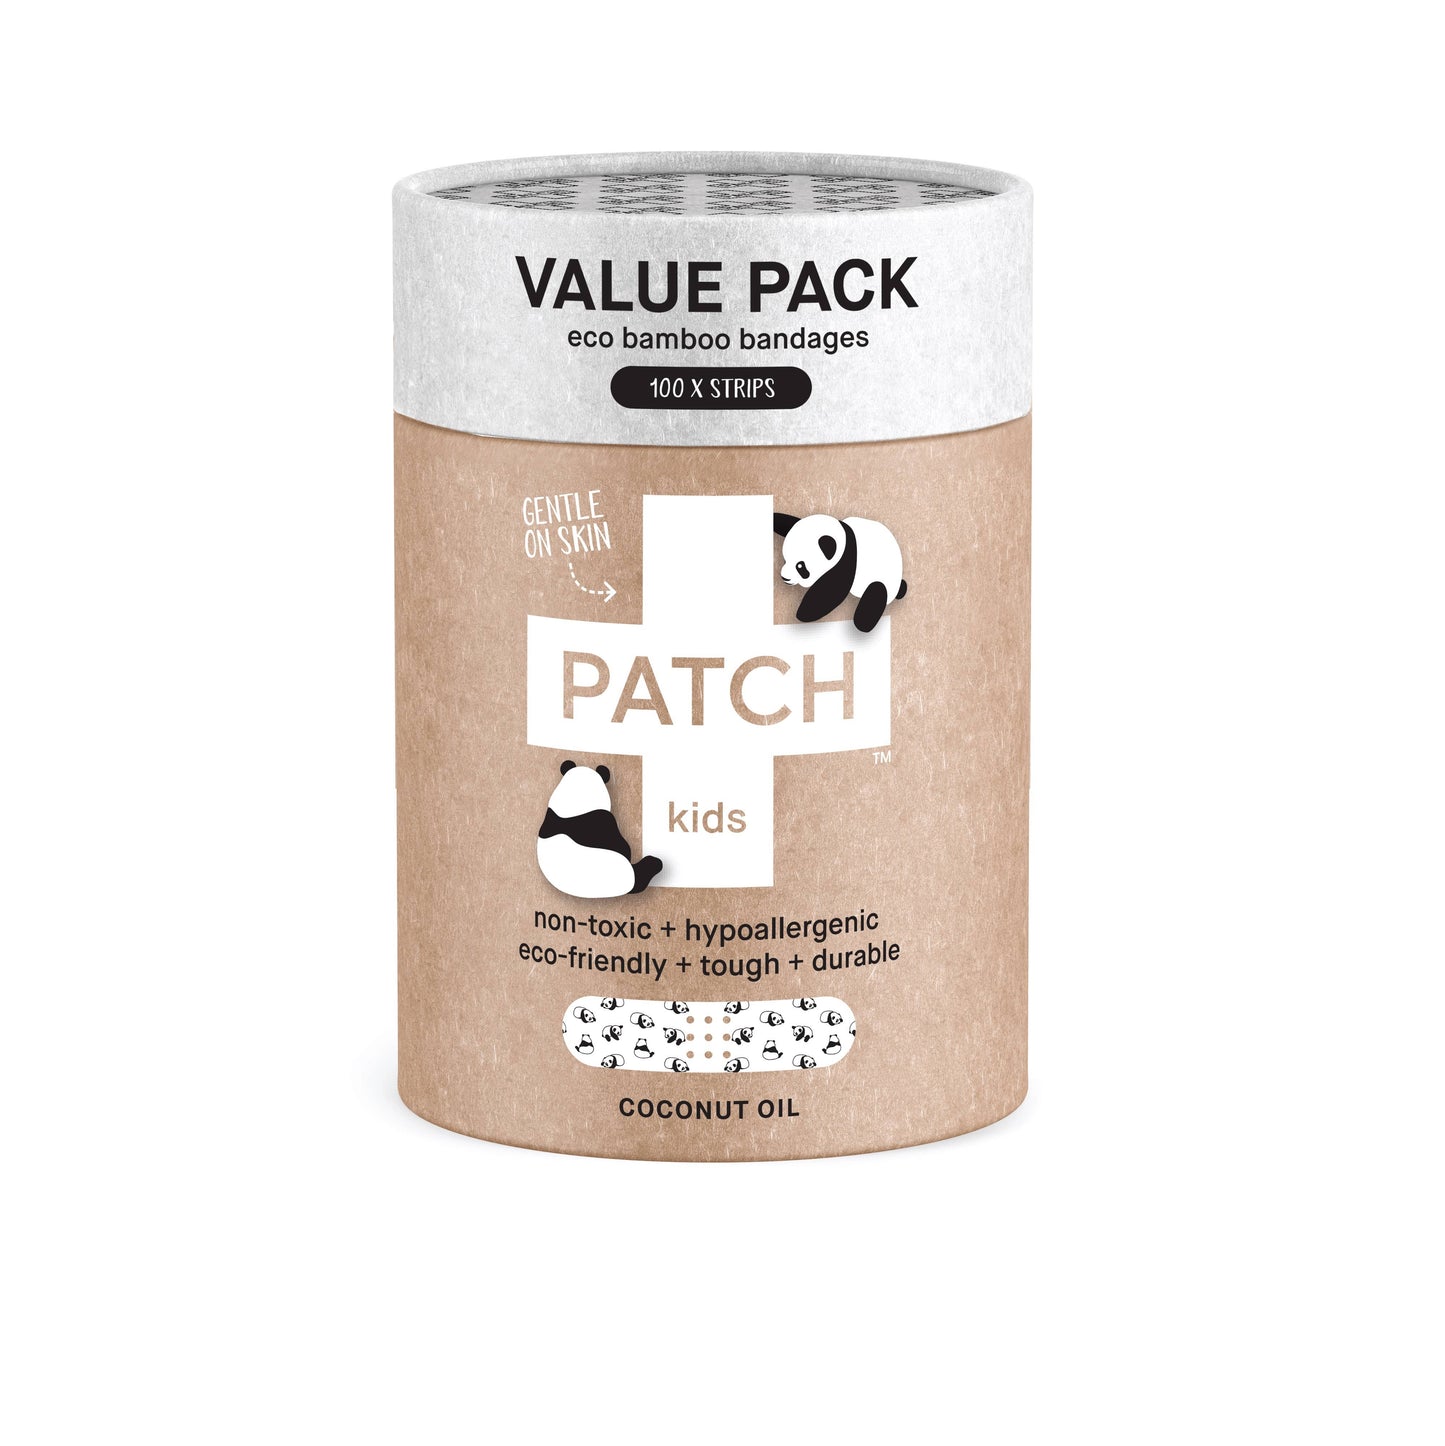 PATCH Bamboo Bandages - Panda Value Pack